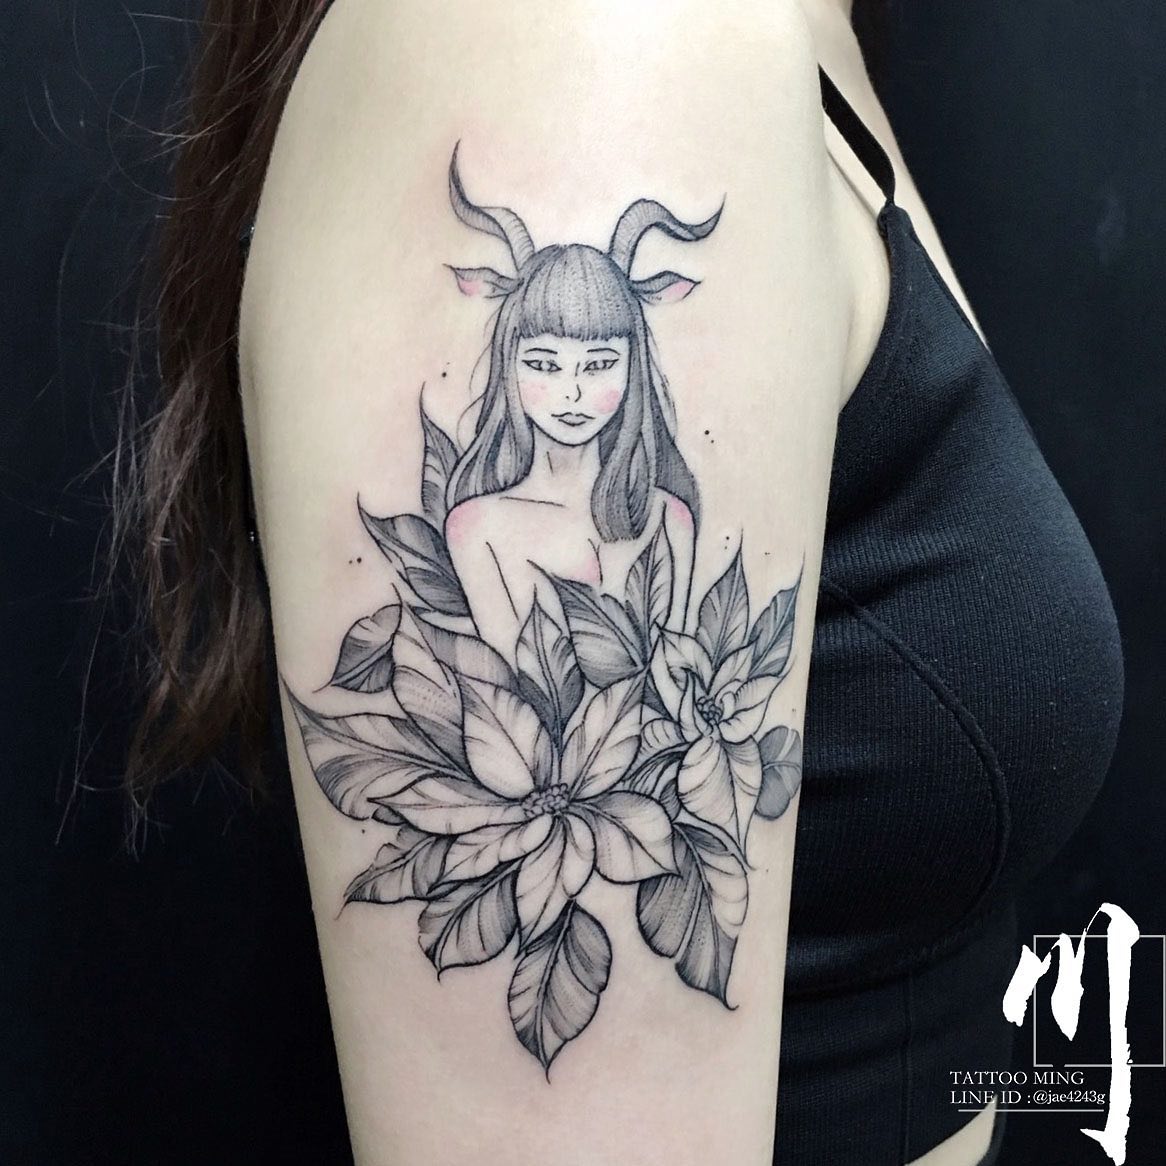 Capricorn Goddess and flowers tattoo located on the outer arm